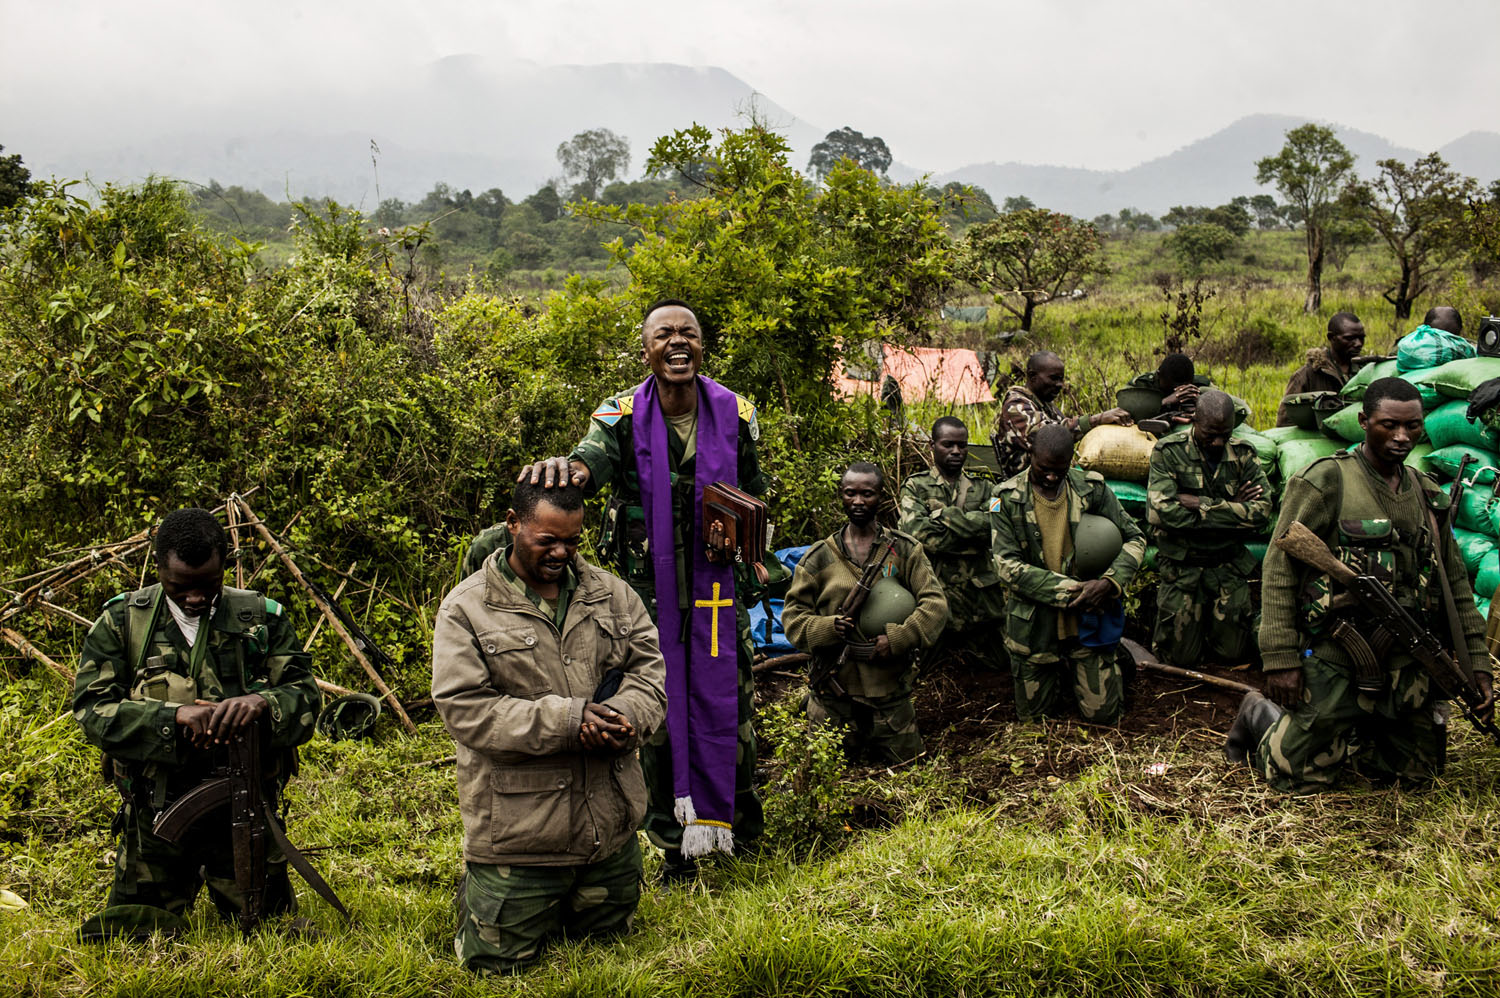  A Congolese military chaplain prays with soldiers at the frontline in Kibumba, outside Goma. This position is the furthest advance point of the military. Members of the M-23 rebel group are within shouting distance. 